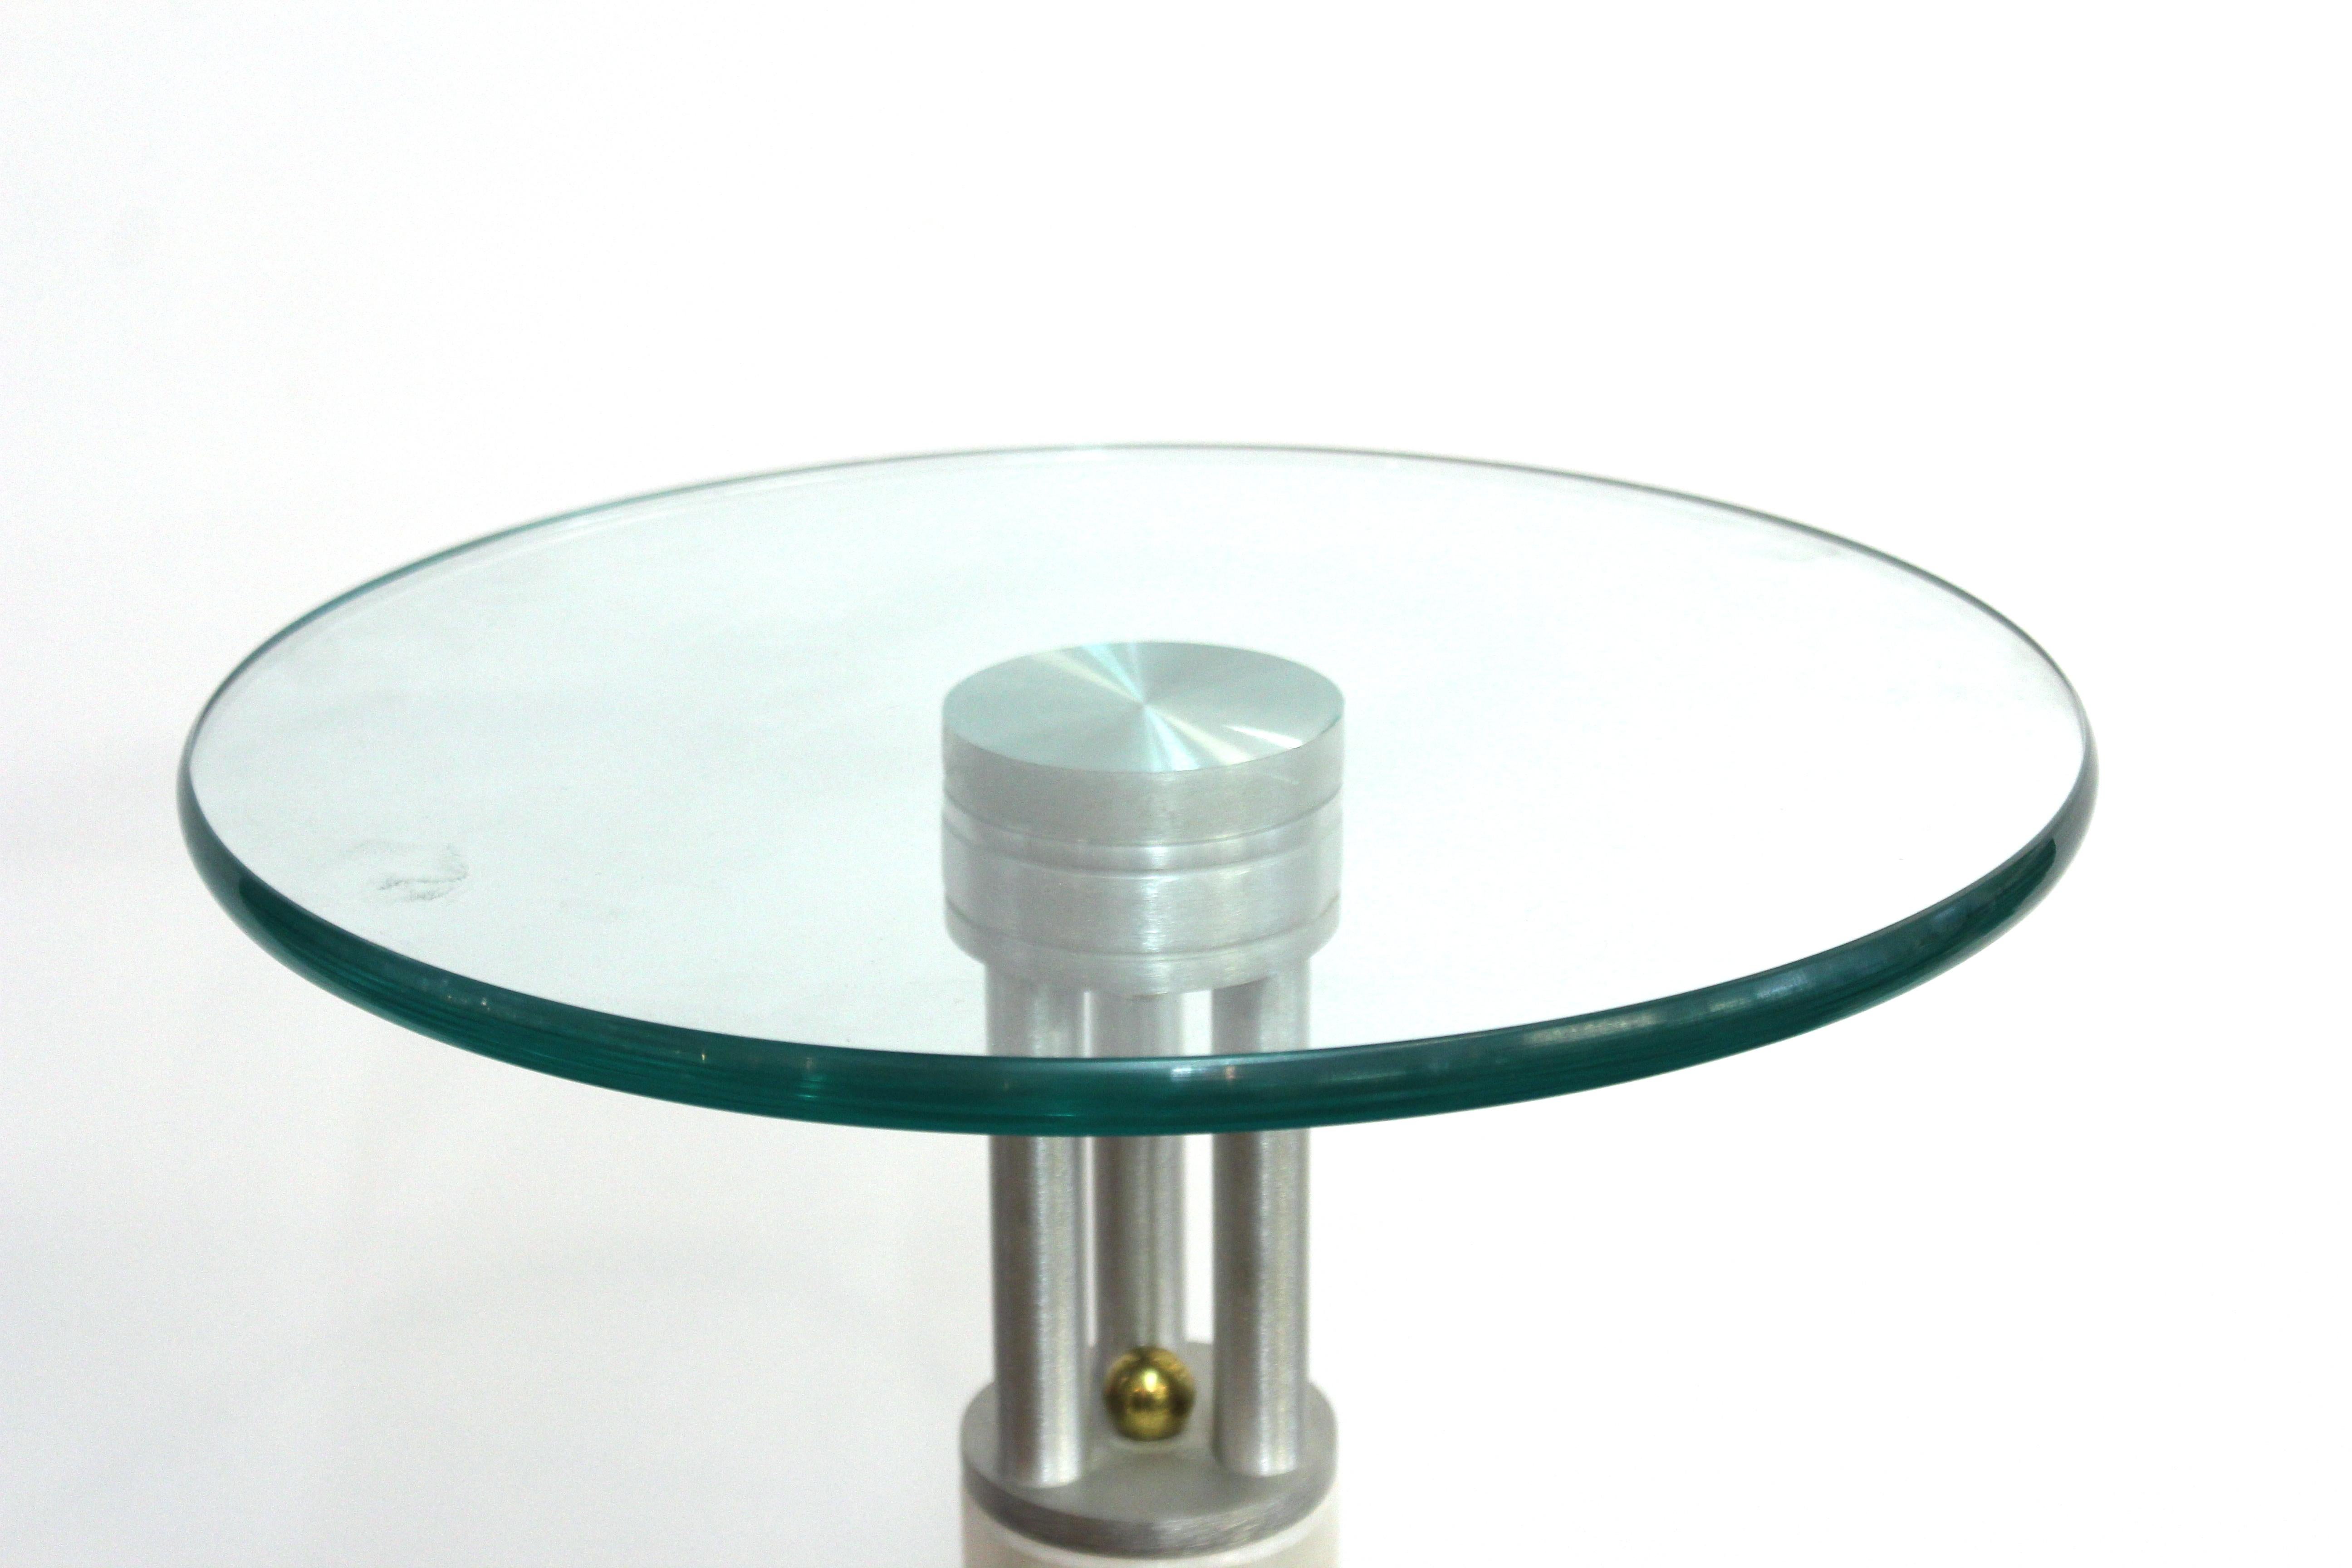 Postmodern pedestal or side table with a structure made of various metal and marble elements and a circular glass top. The piece dates from the circa 1990s and is in great vintage condition.